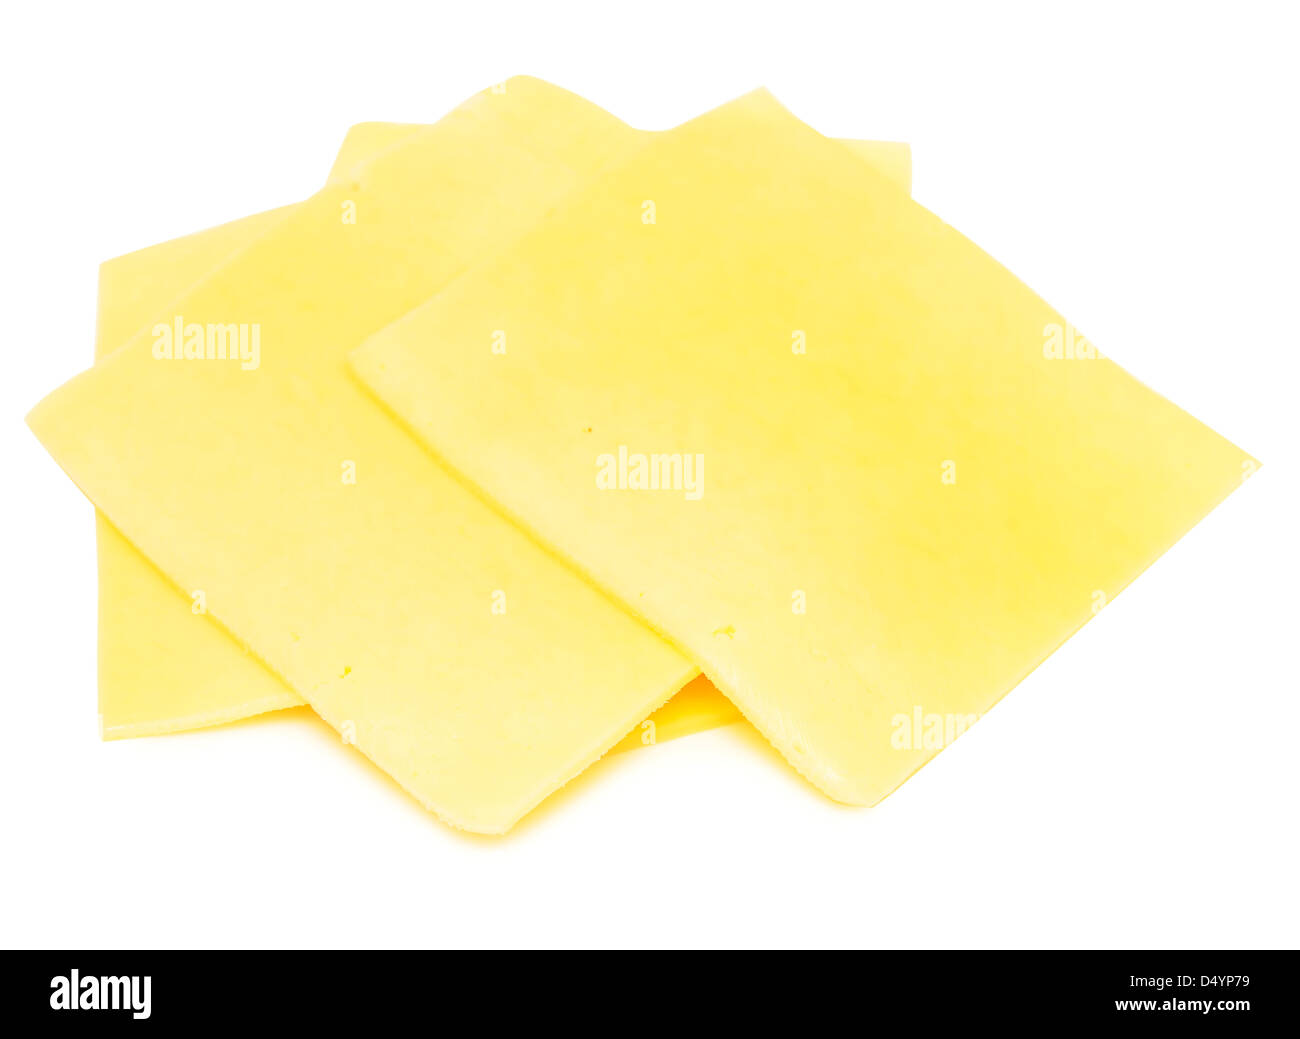 cheese slices isolated on white Stock Photo